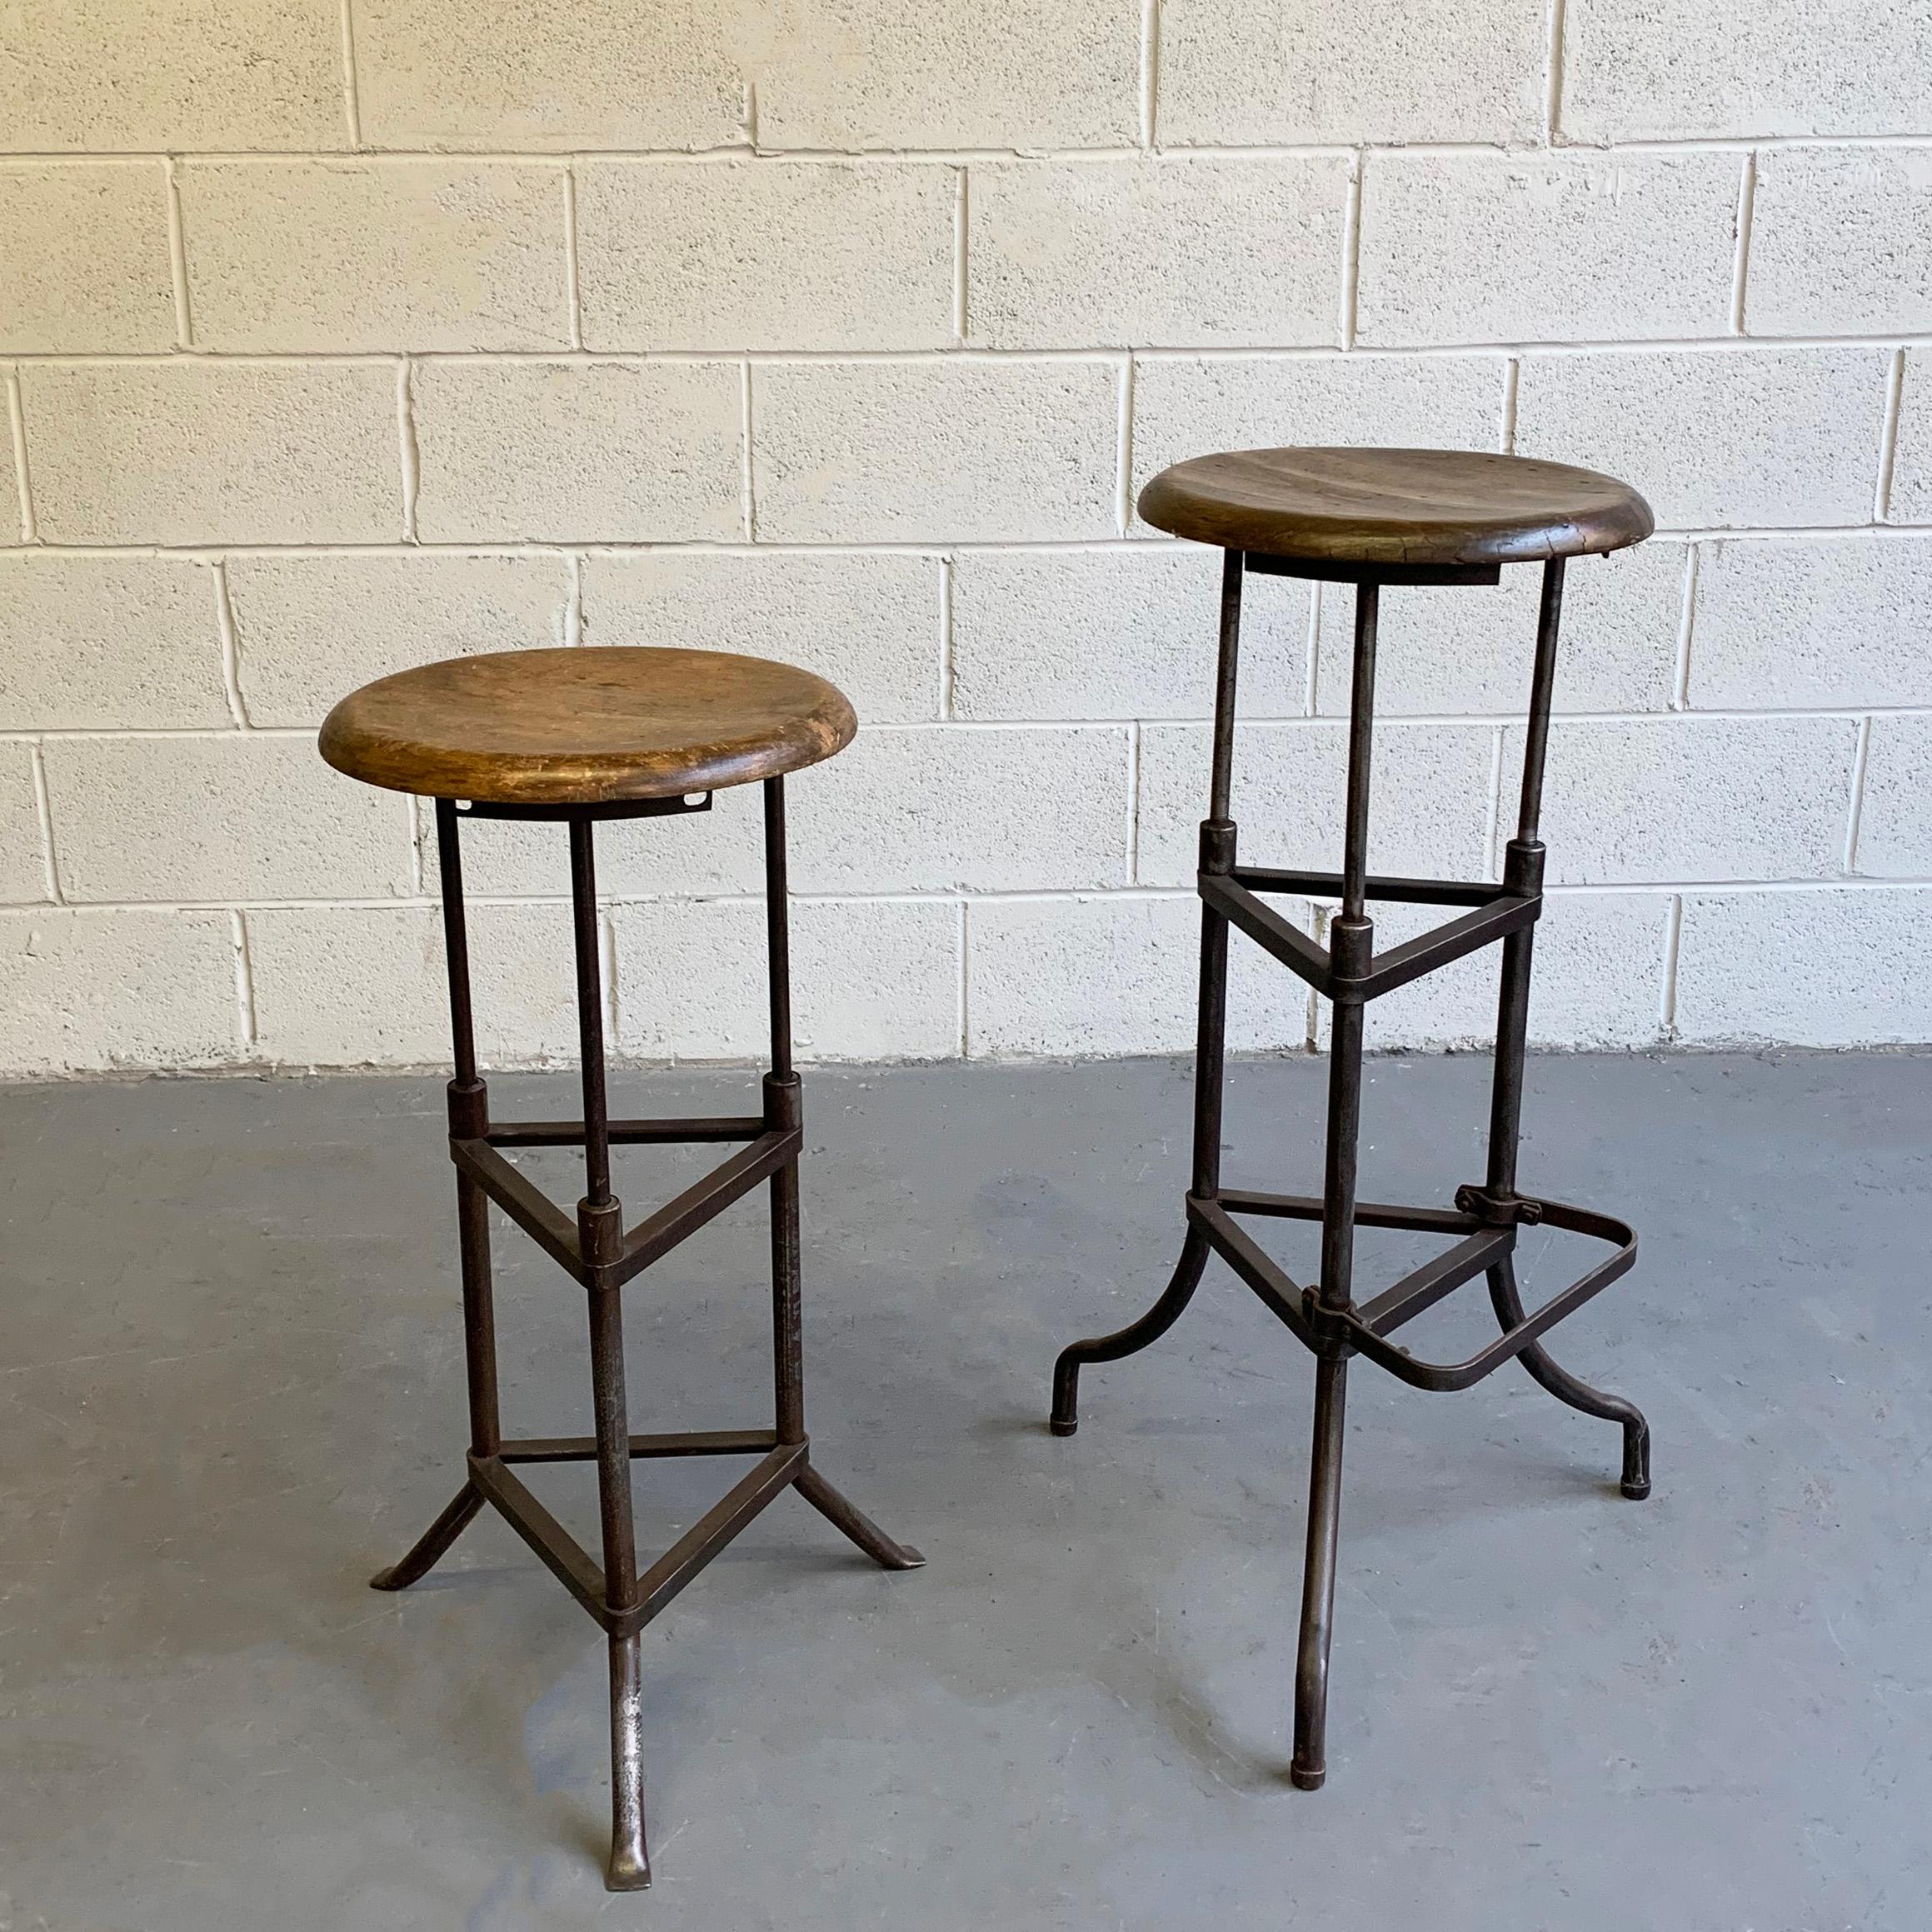 Early 20th Century Industrial Drafting Stool For Sale at 1stDibs